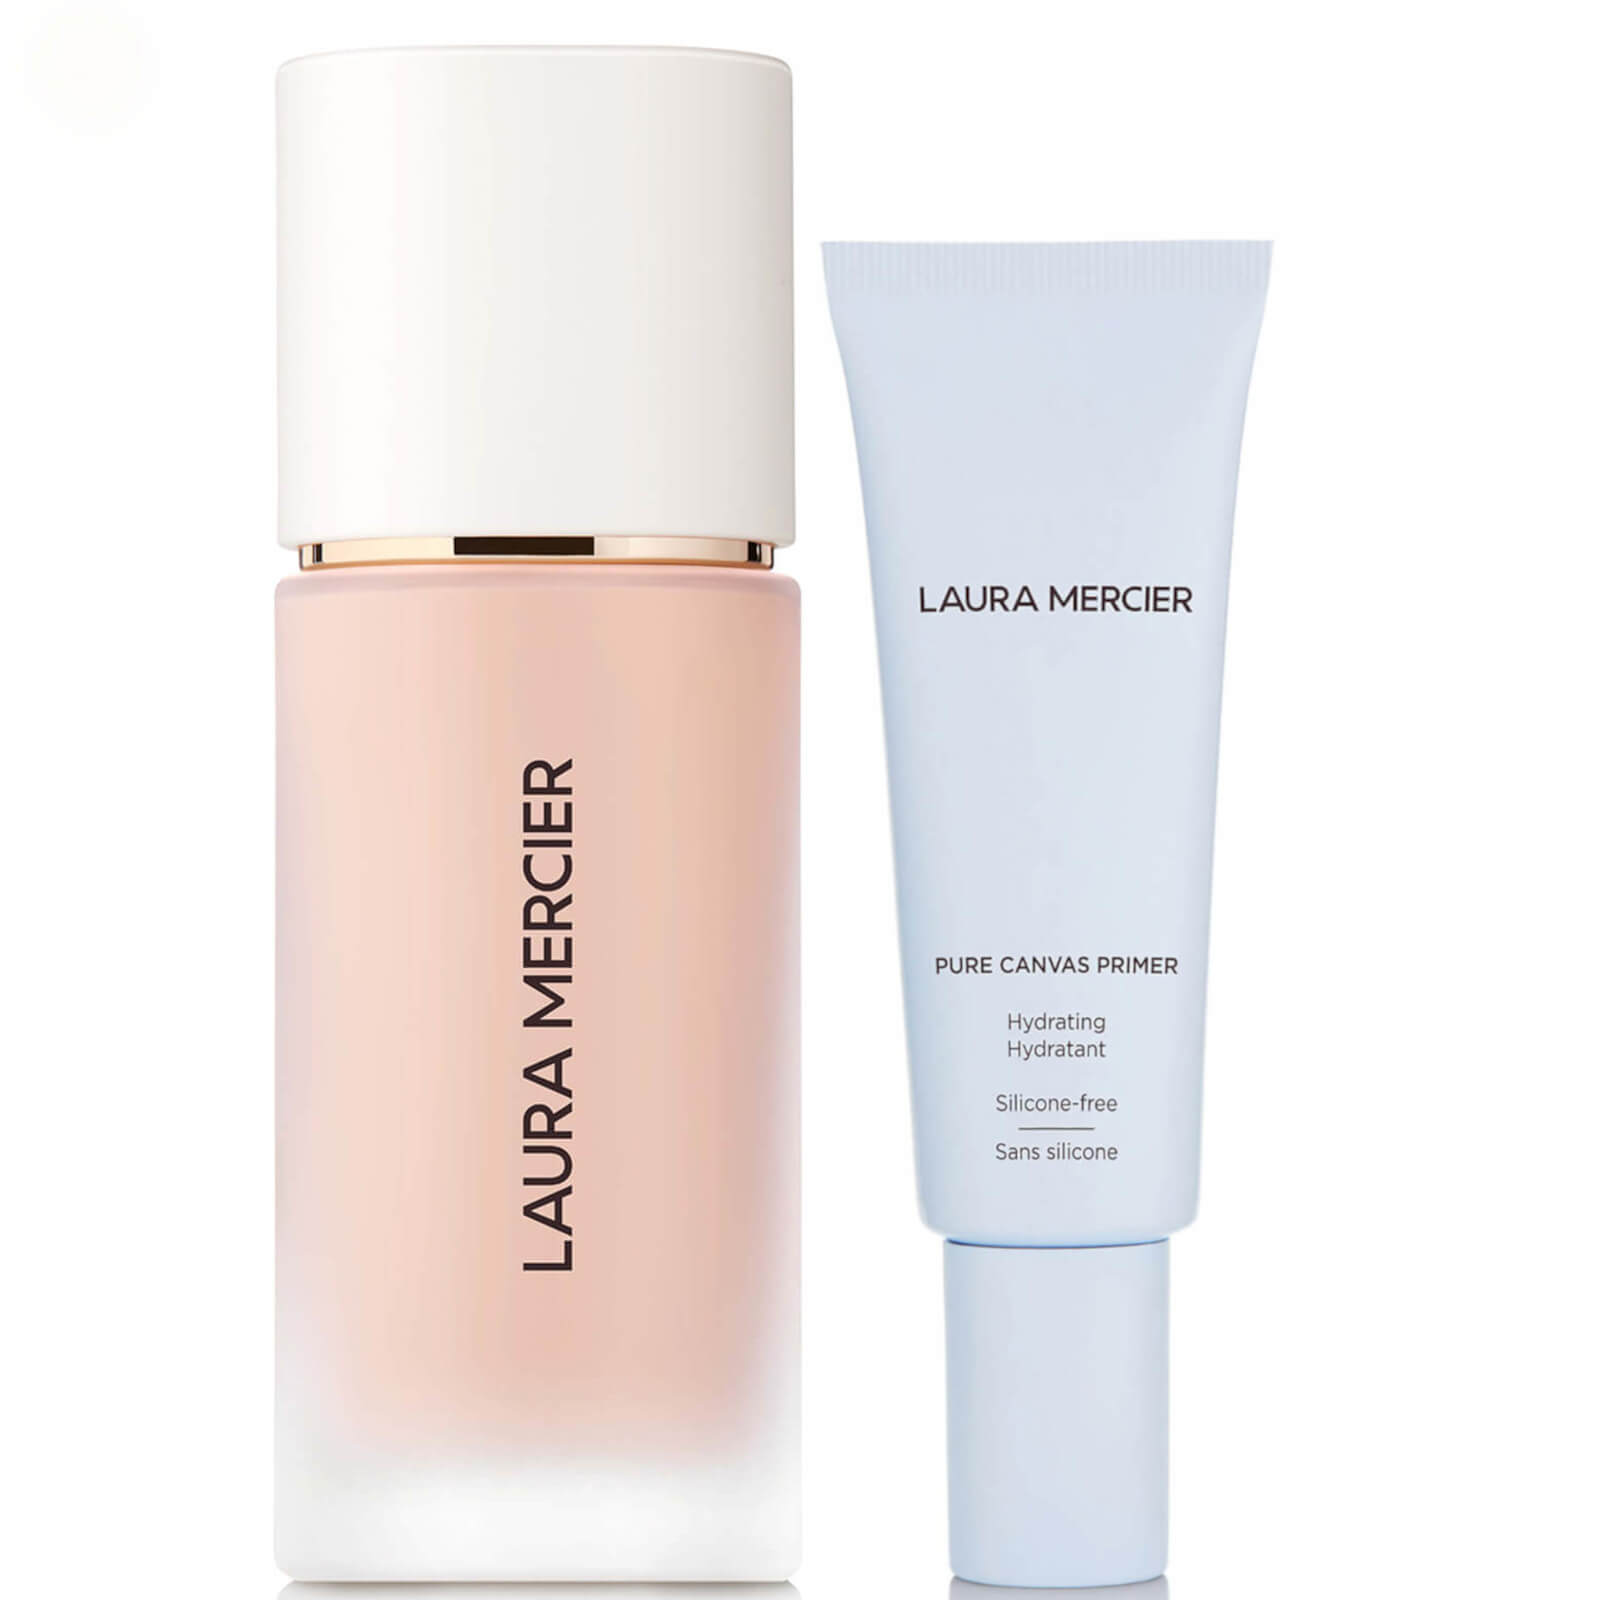 Laura Mercier Real Flawless Foundation and Pure Canvas Hydrating Primer Bundle (Various Shades) - 1C1 Cool Vanille